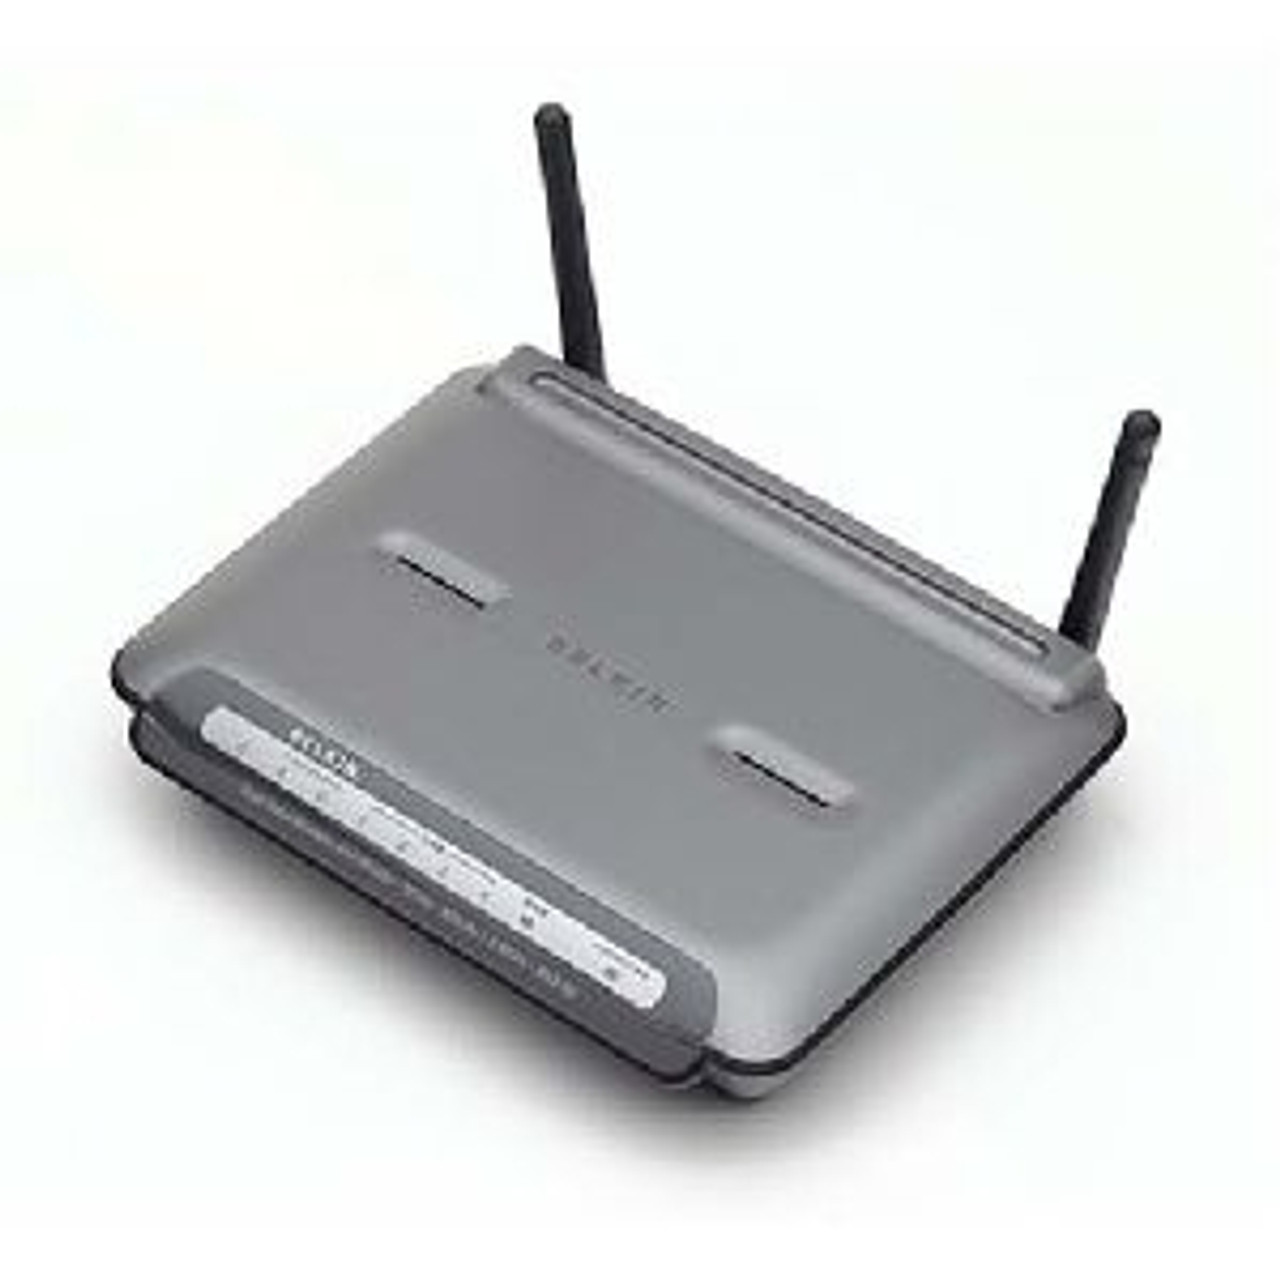 F6D3230-4 Belkin Dual-Band Wireless A+G Router (Refurbished)